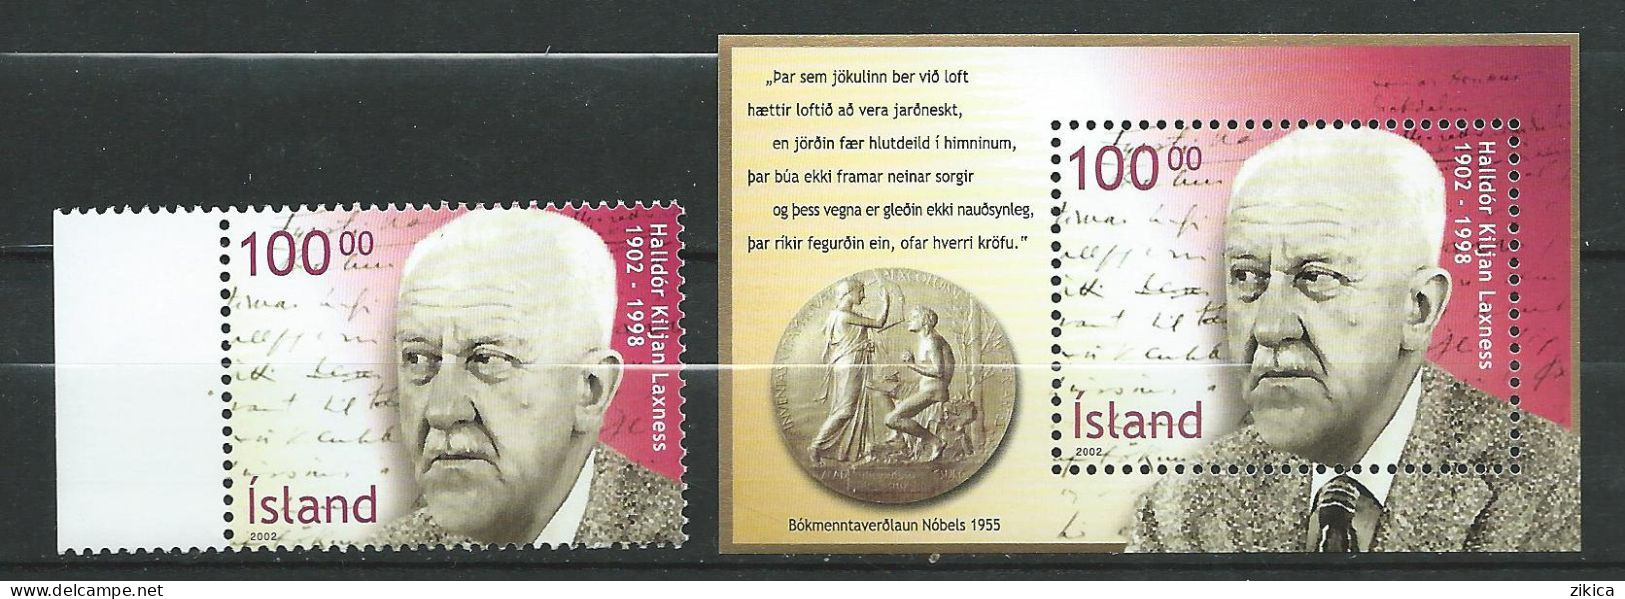 Iceland 2002 The 100th Ann. Of The Birth Of Nobel Prize Winner Halldor Laxness.Block And Stamp. MNH** - Neufs